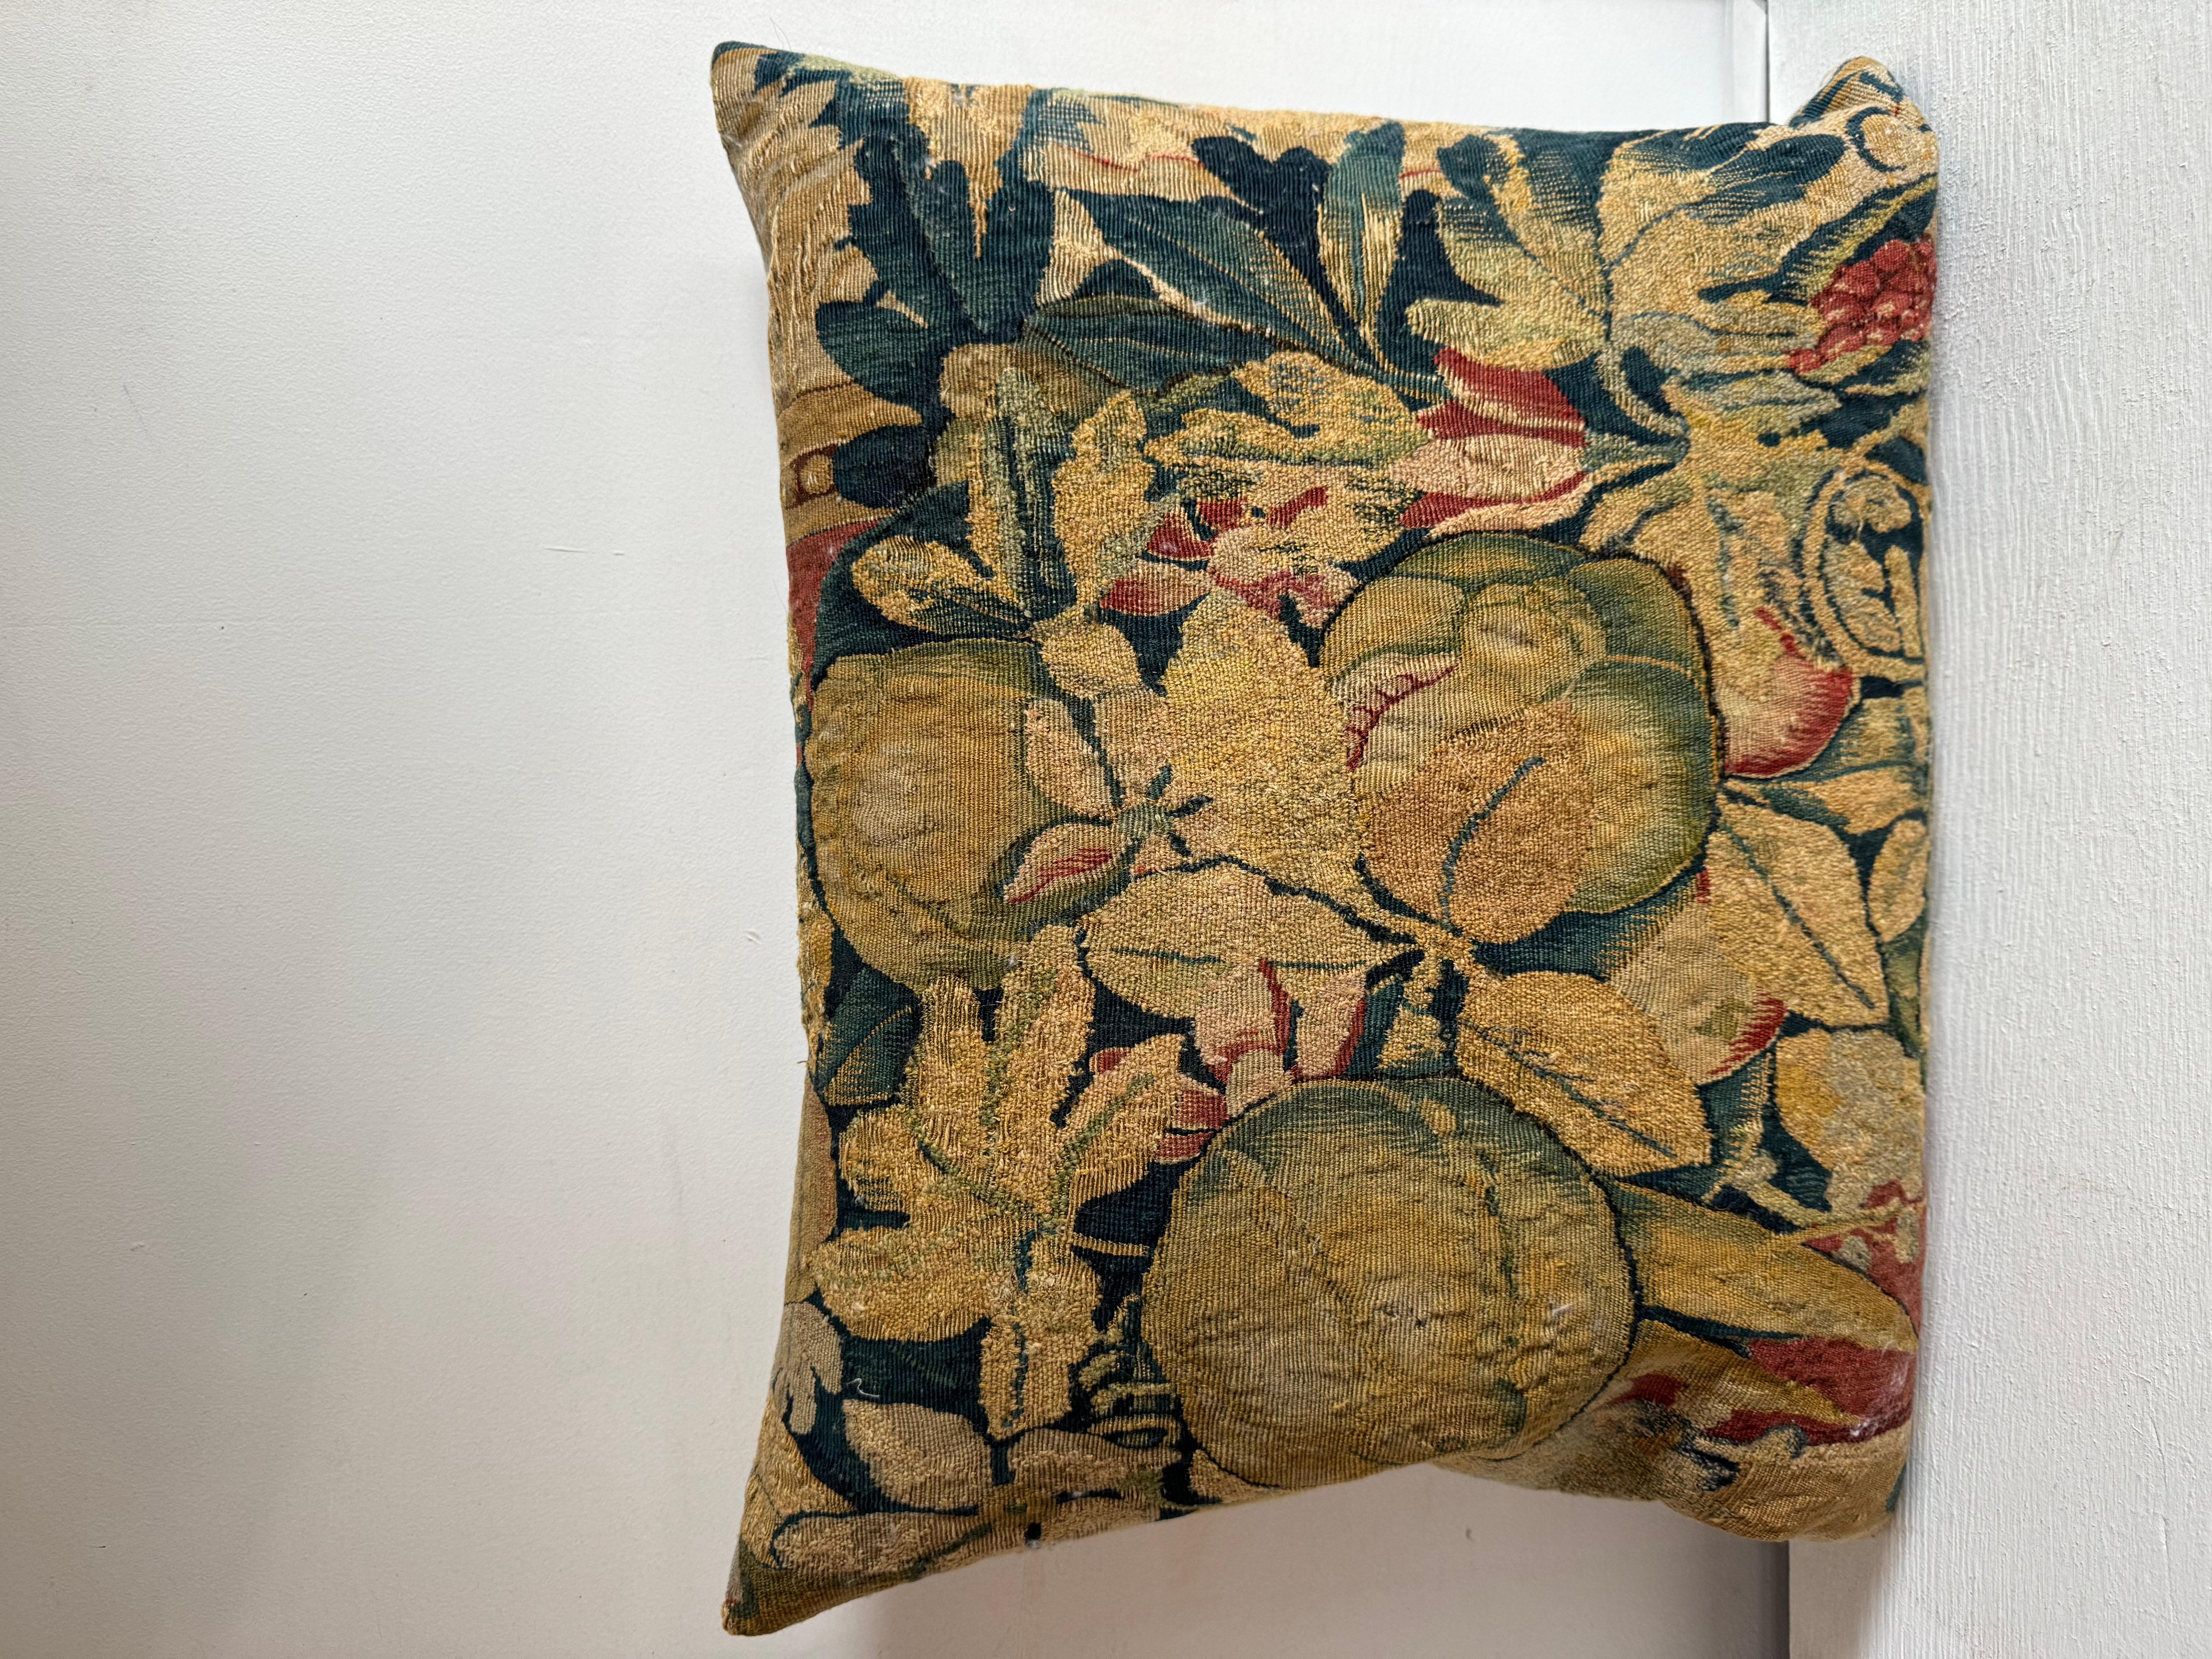 Empire Brussels 16th Century Pillow - 21